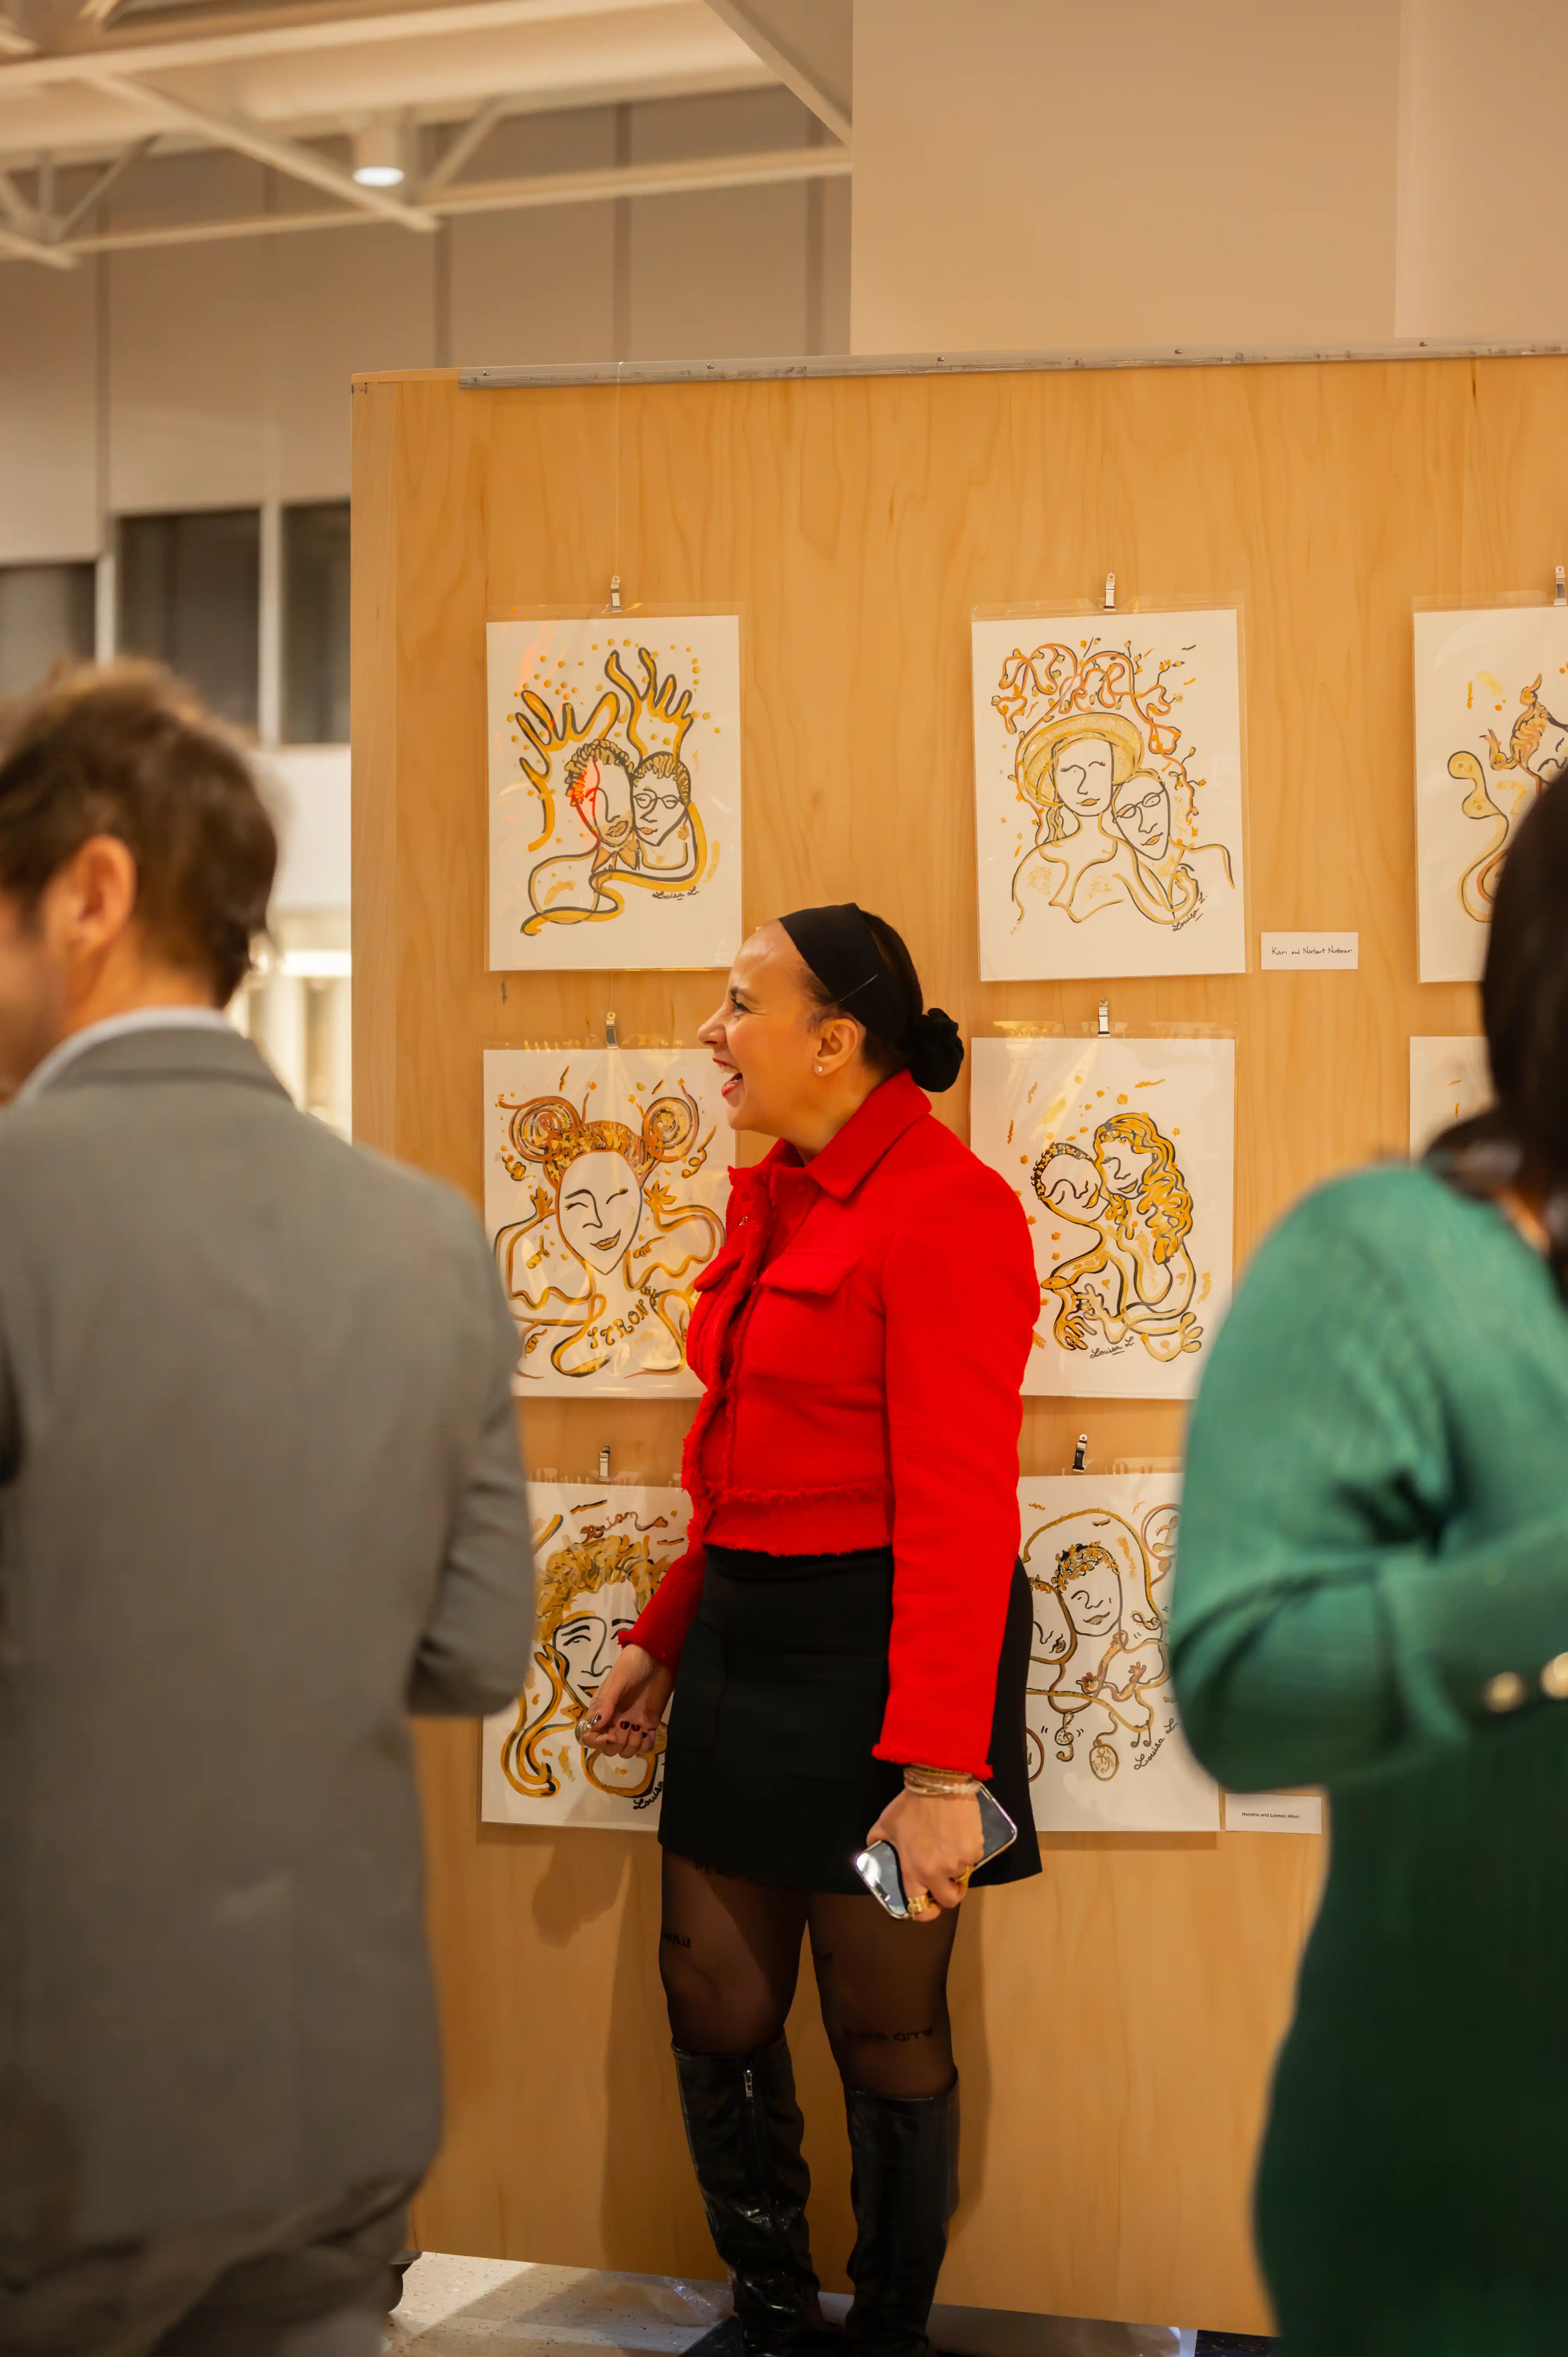 Visitors viewing artwork at an exhibition gallery.